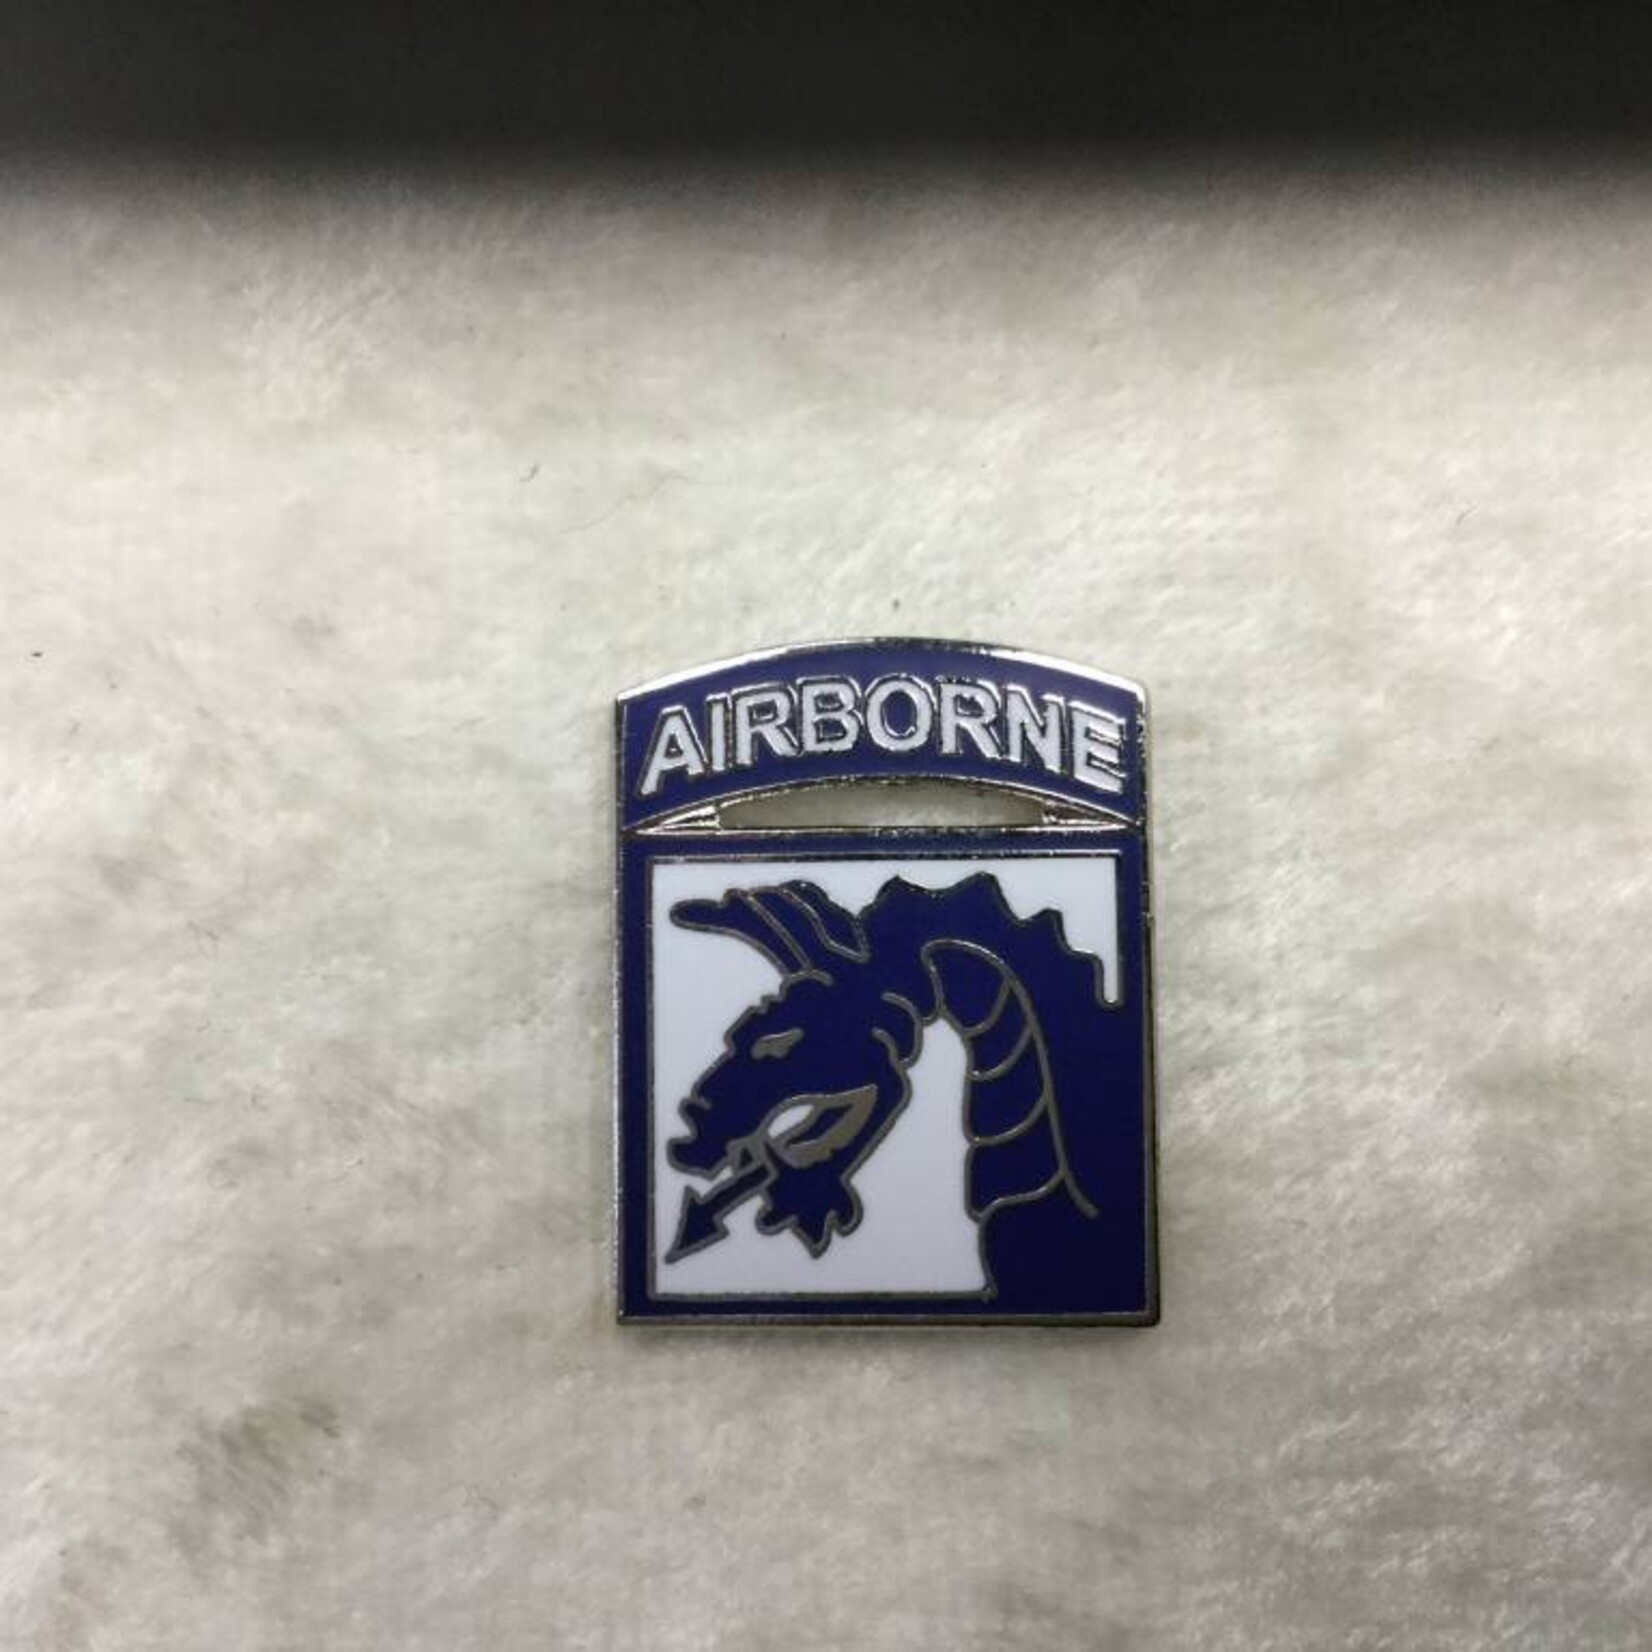 HOOVER'S MFG CO. 18th AIRBORNE CORP